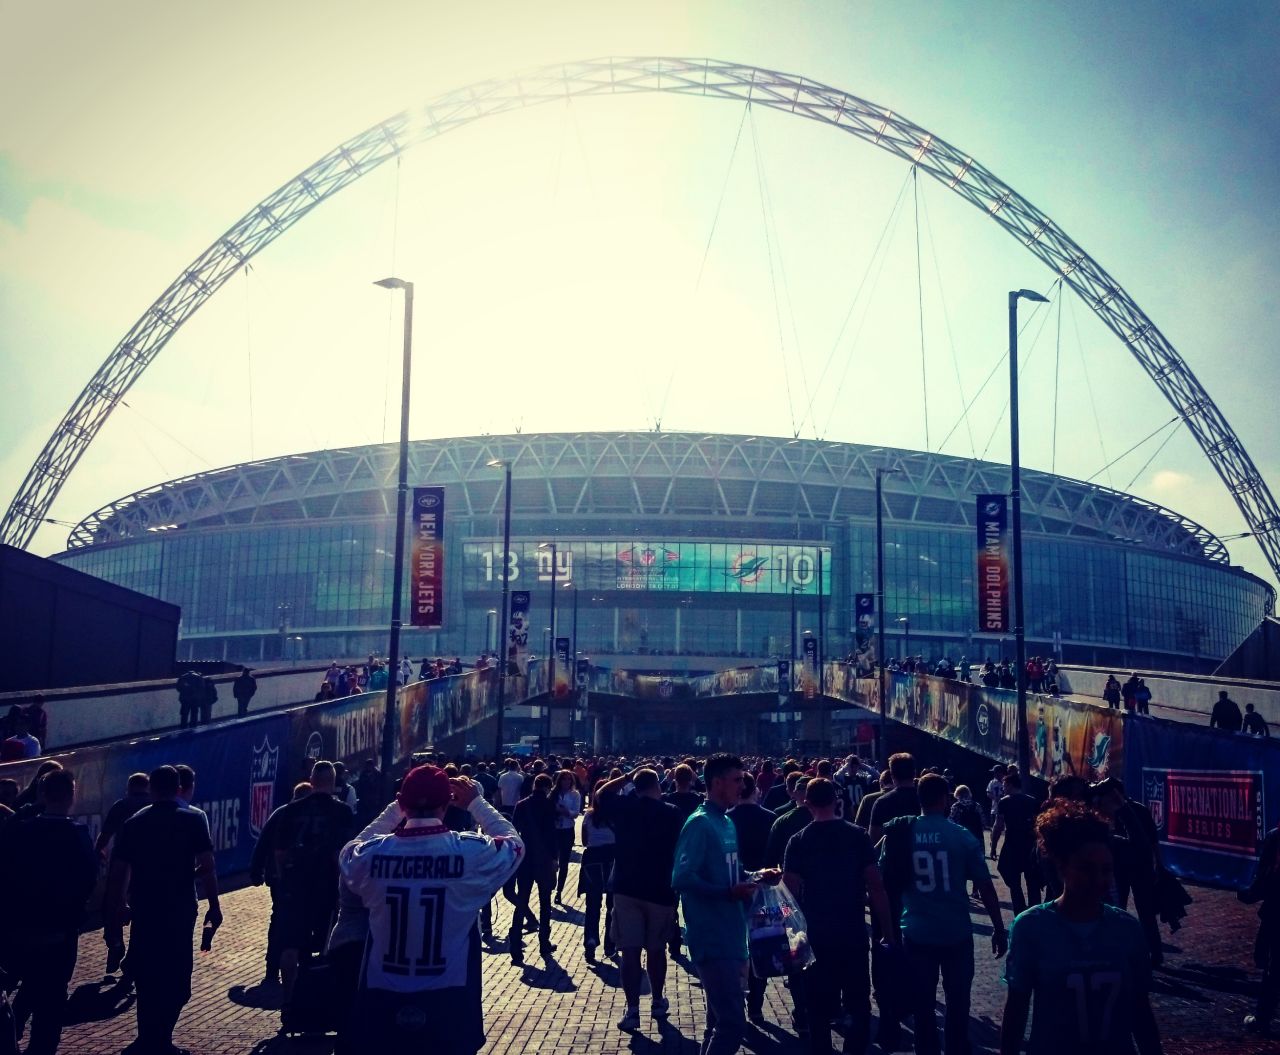 There are two more matches planned for Wembley this year. The Buffalo Bills take on the Jacksonville Jaguars on October 23, while the Detroit Lions host the Kansas City Chiefs on November 1.